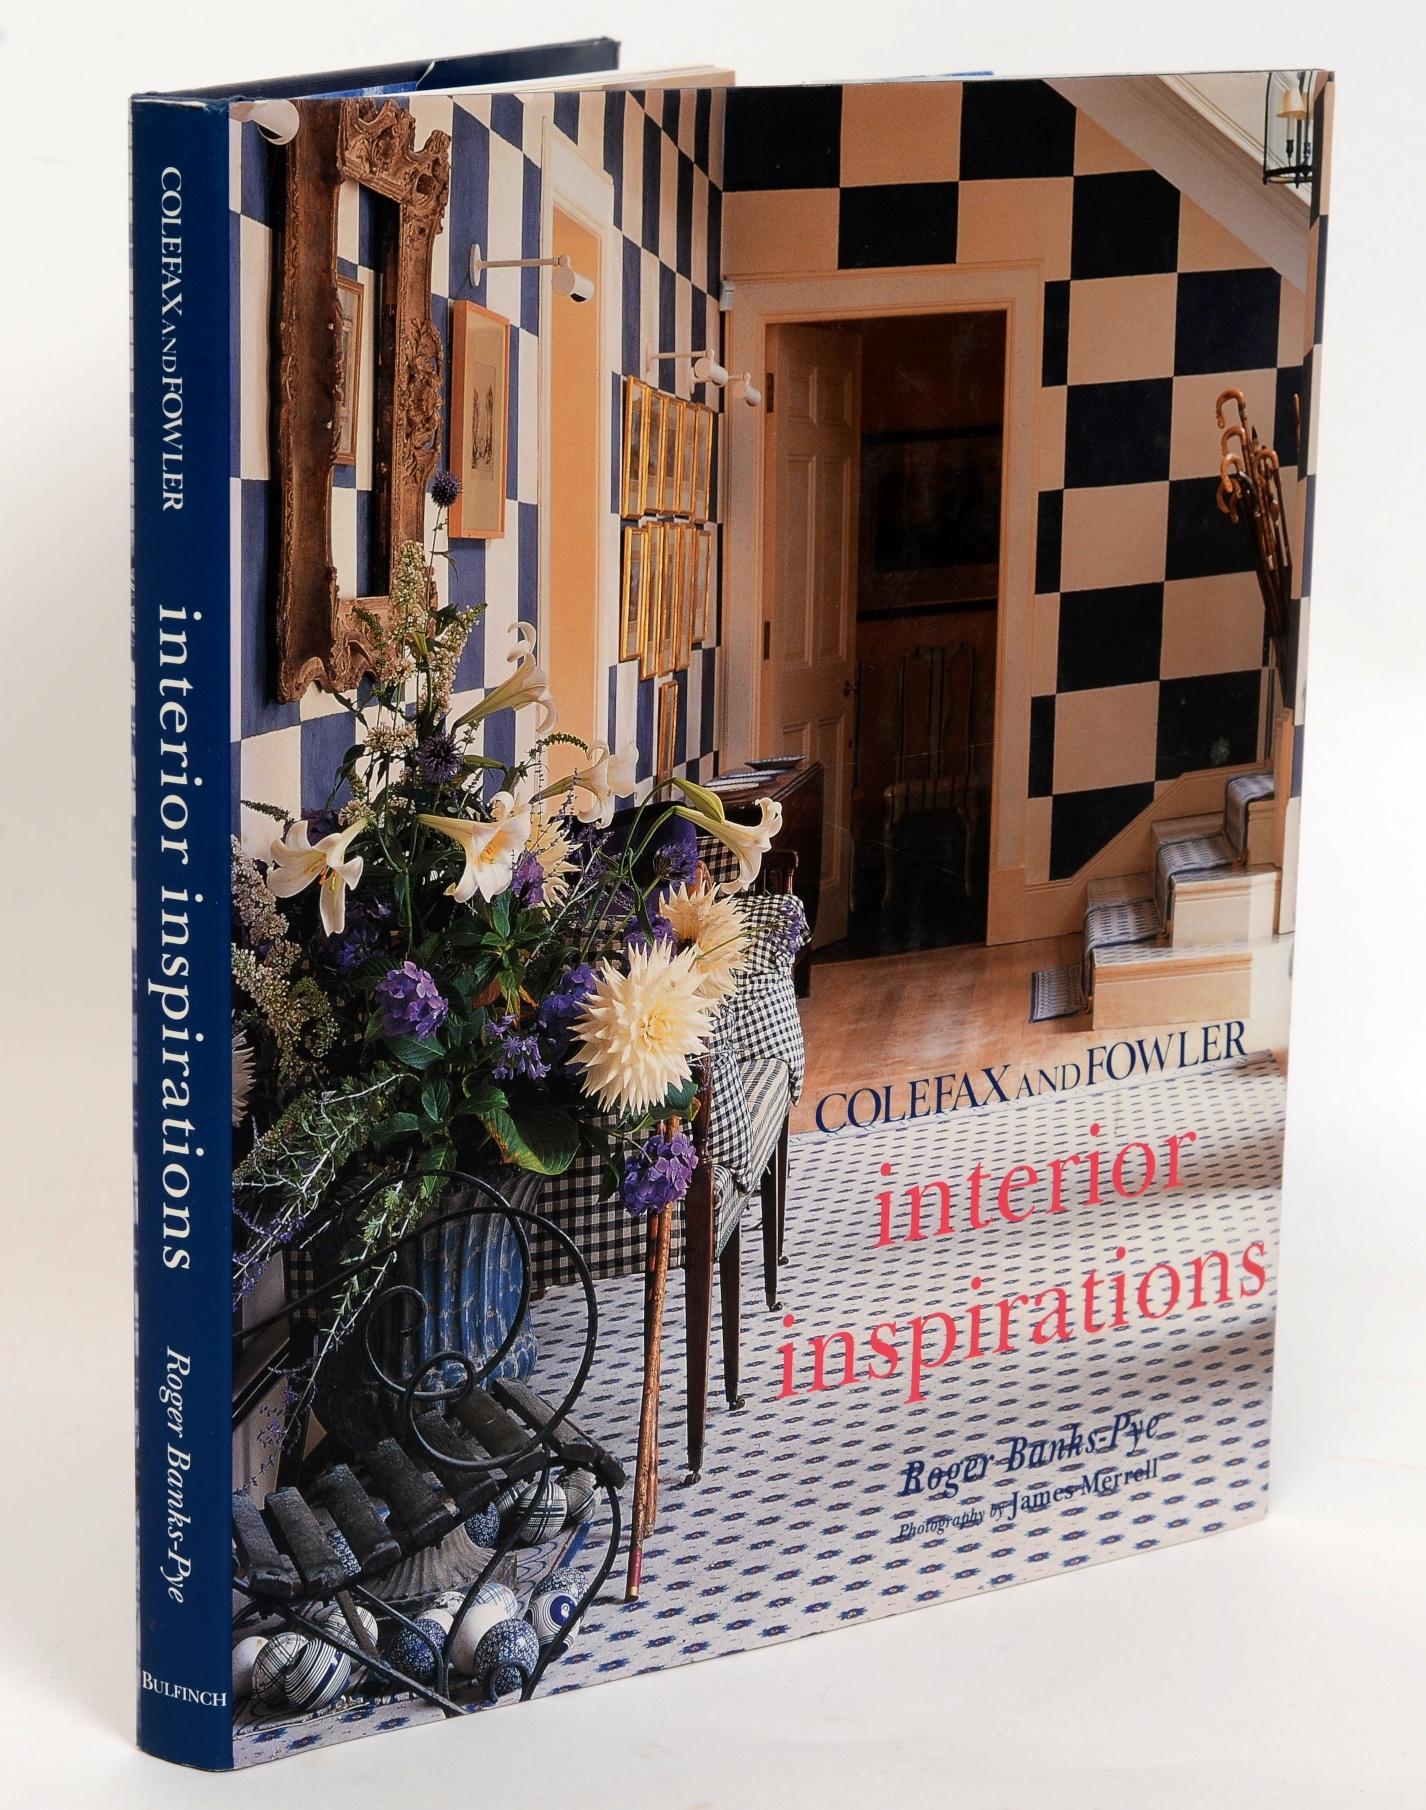 Colefax & Fowler's Interior Inspirations by Roger Banks-Pye, First Edition 2